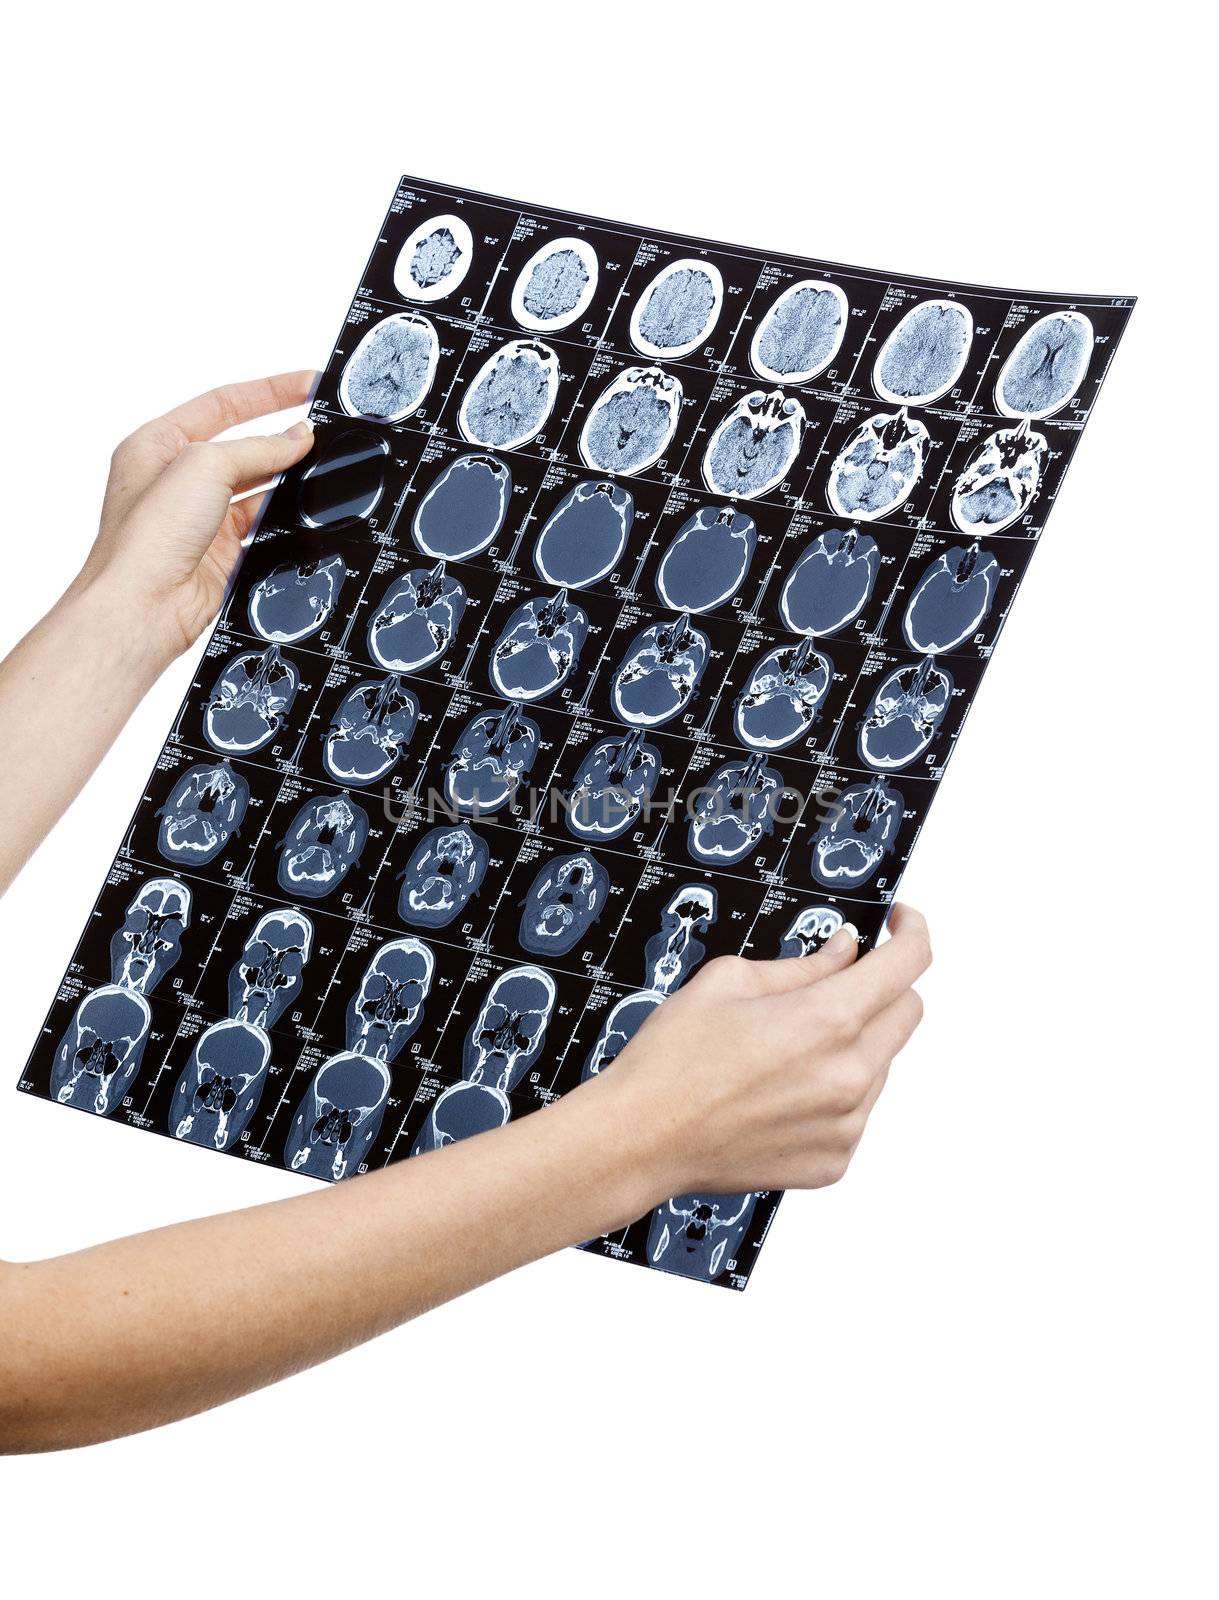 Doctor's hands with mri of human head, isolated on white background